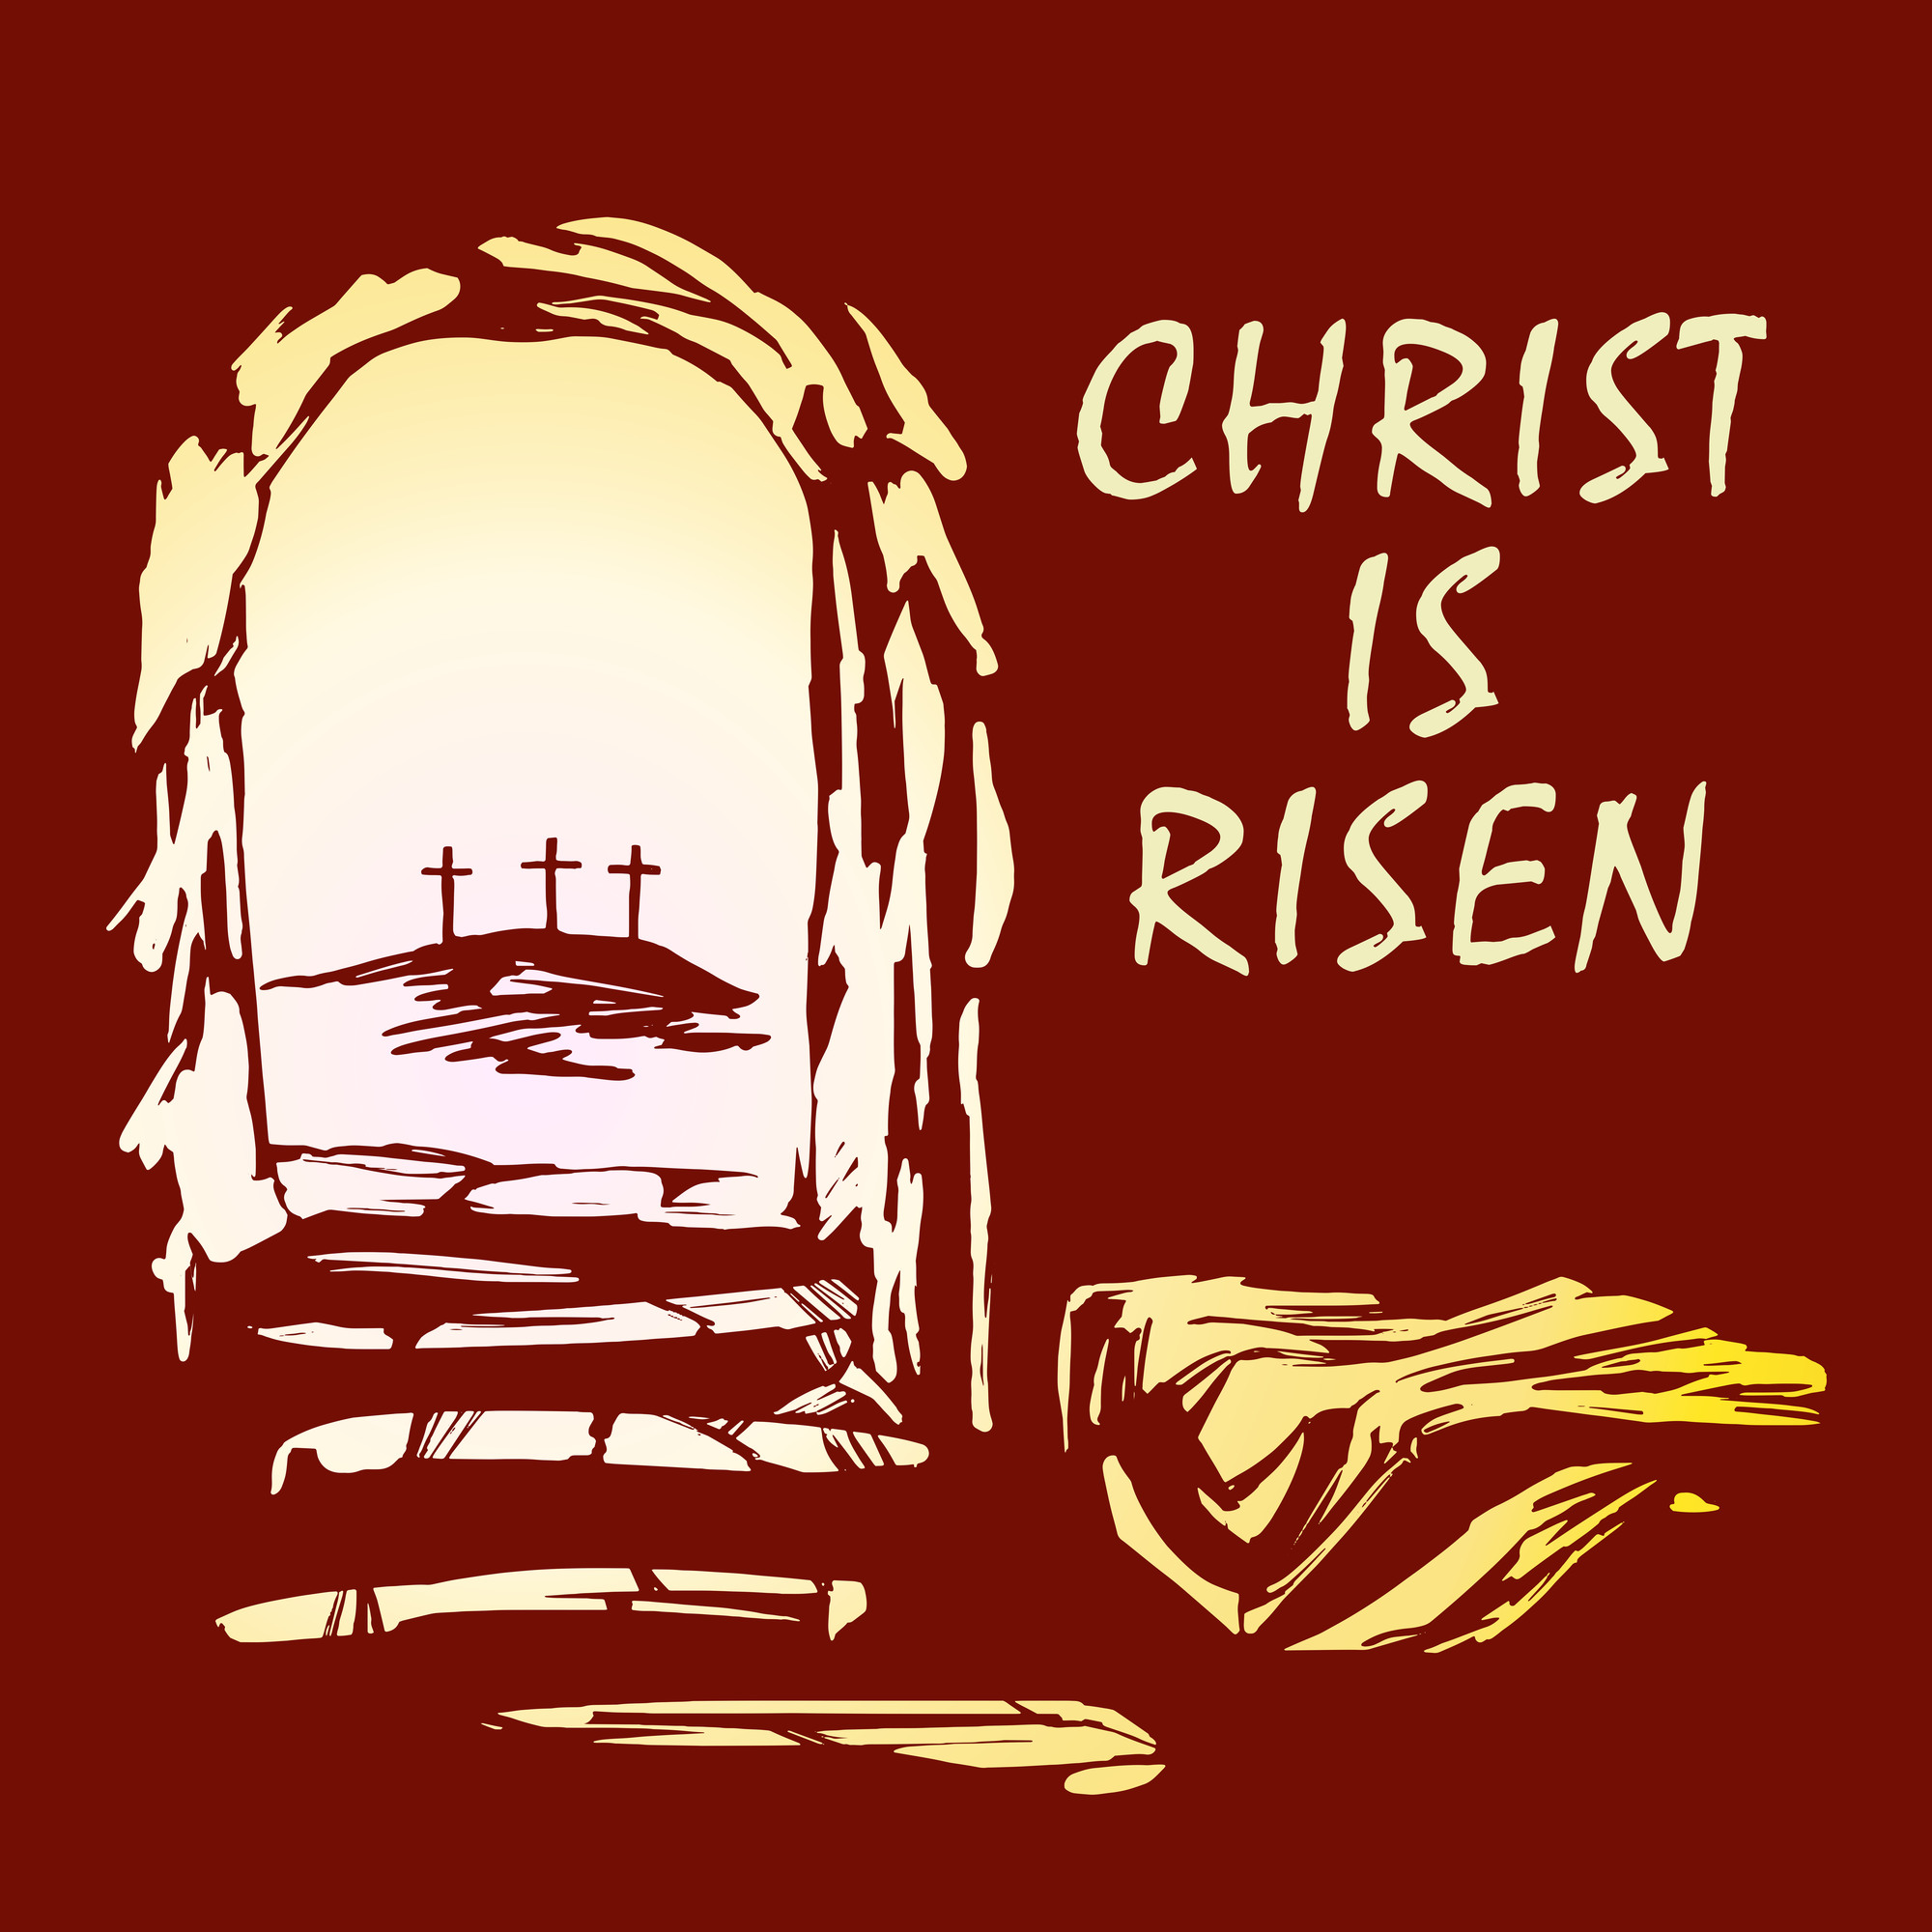 he is risen indeed facebook cover